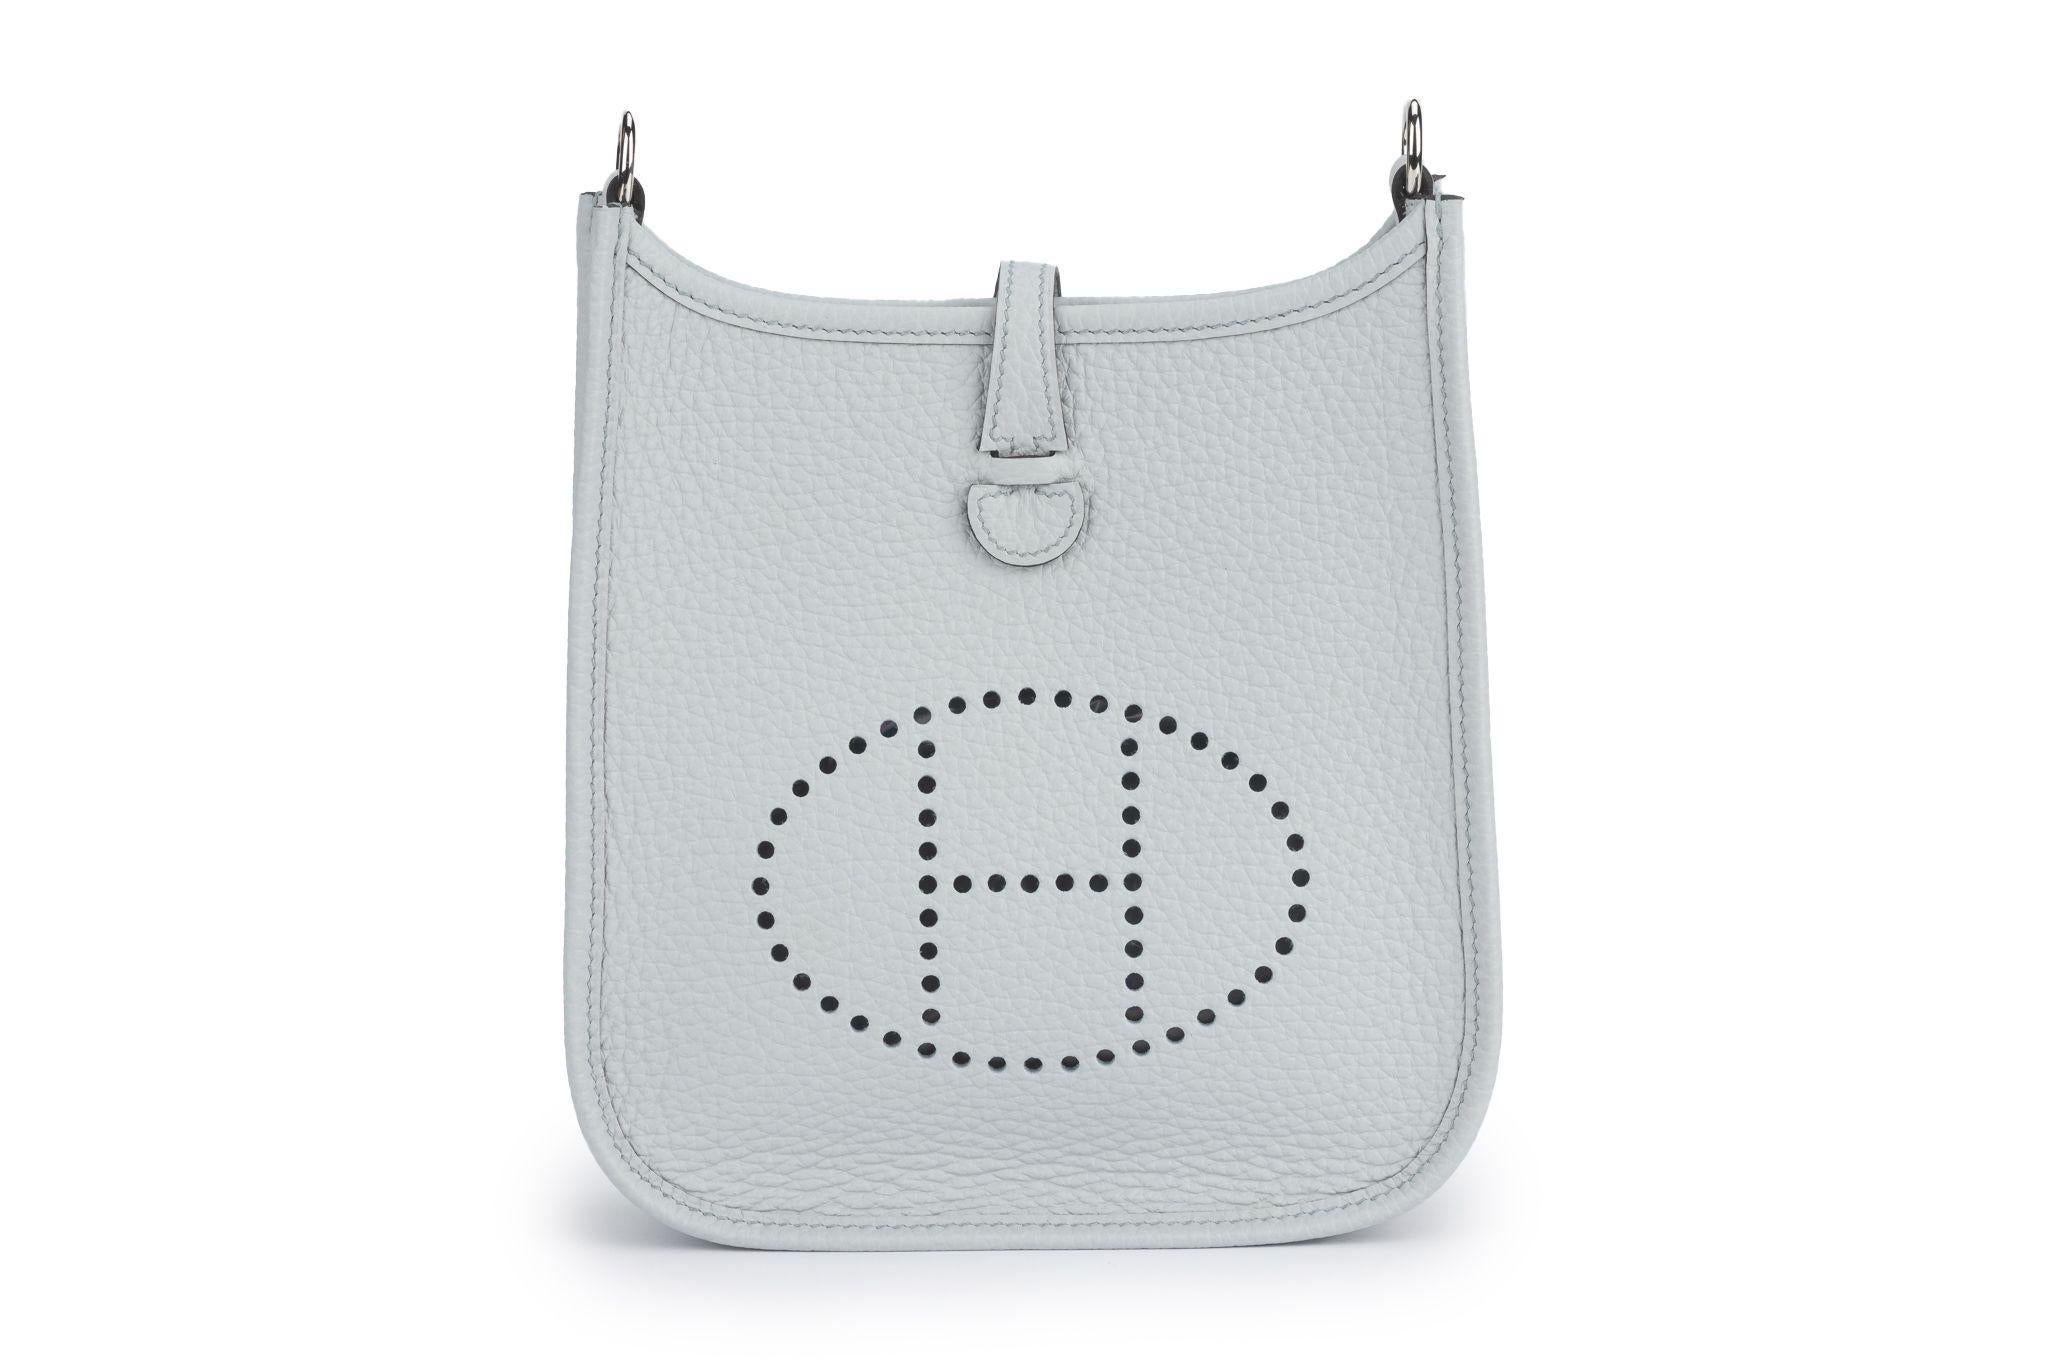 Hermes brand new in unused condition grey Mini Evelyne in Clemence leather with Palladium hardware. The perfect bag to wear crossbody throughout the day. Shoulder Strap 22